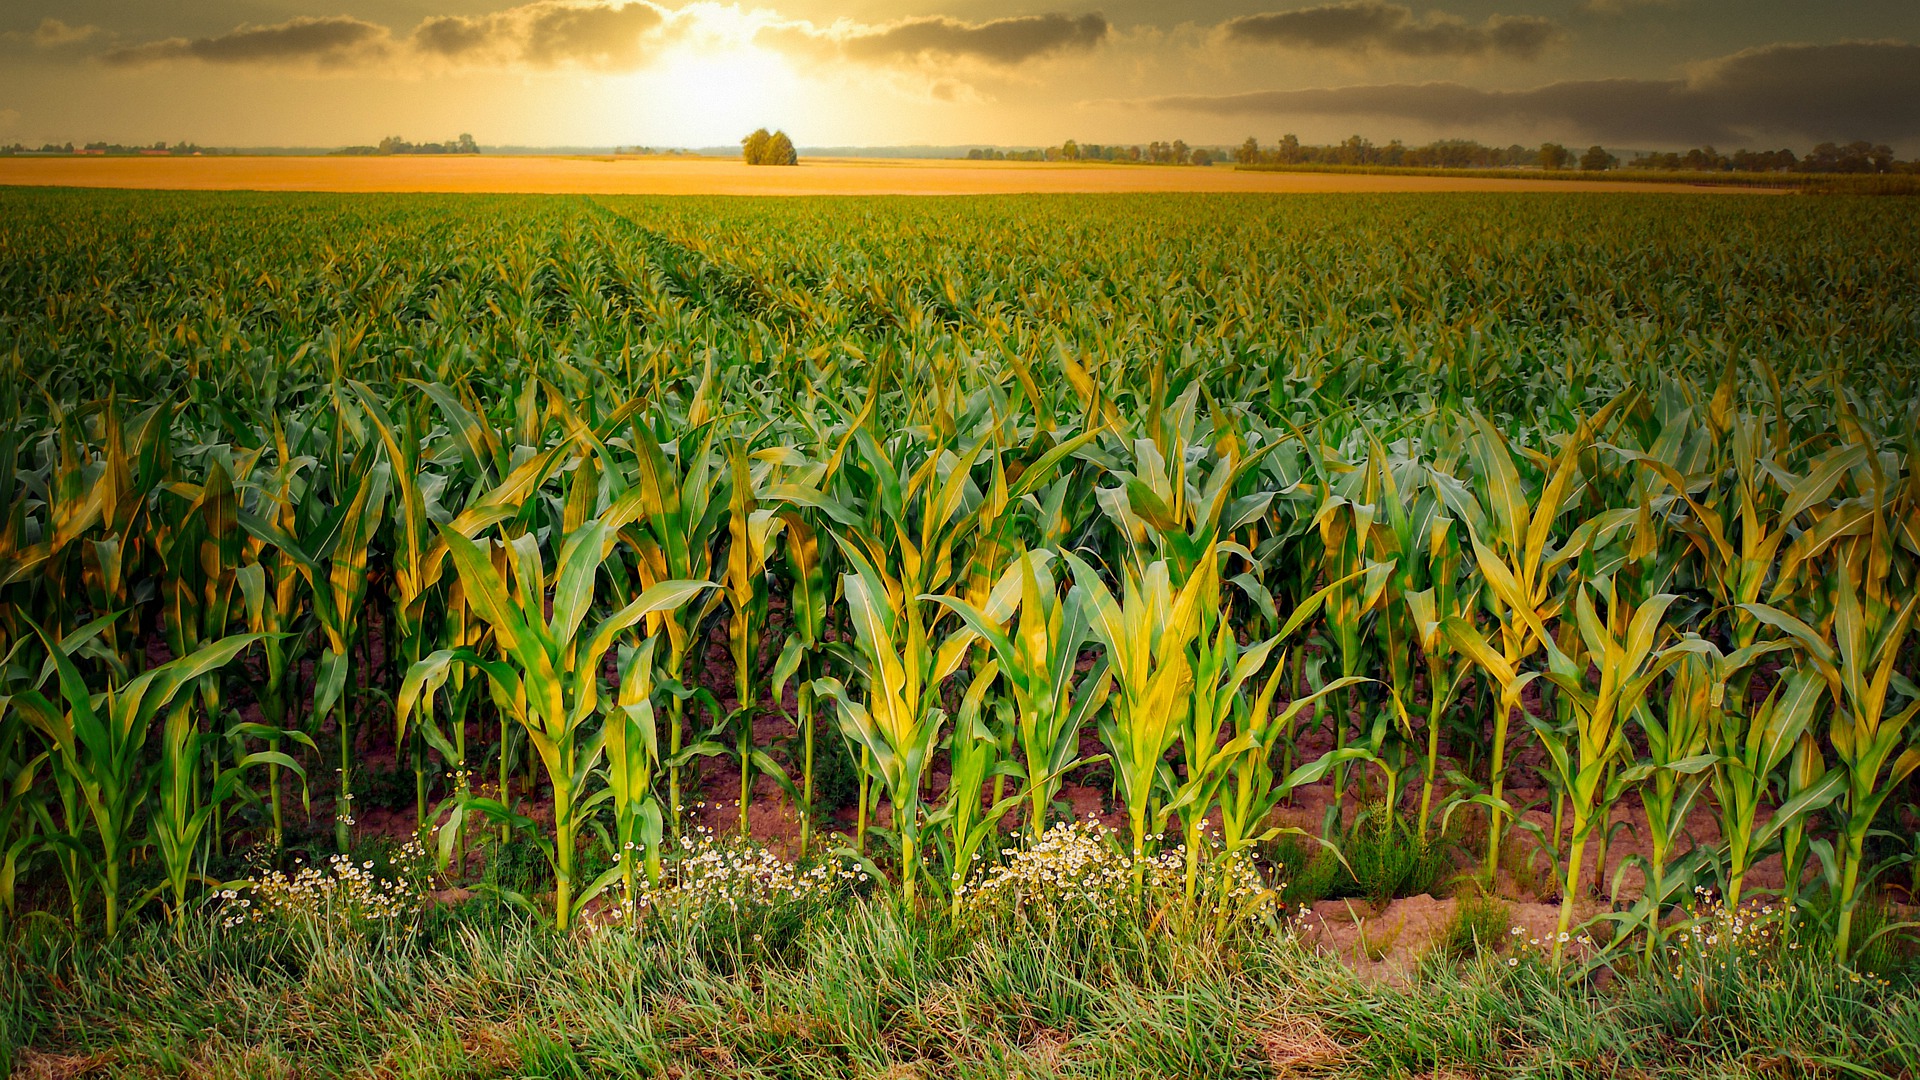 Improved soil moisture across SA bodes well for agriculture activity